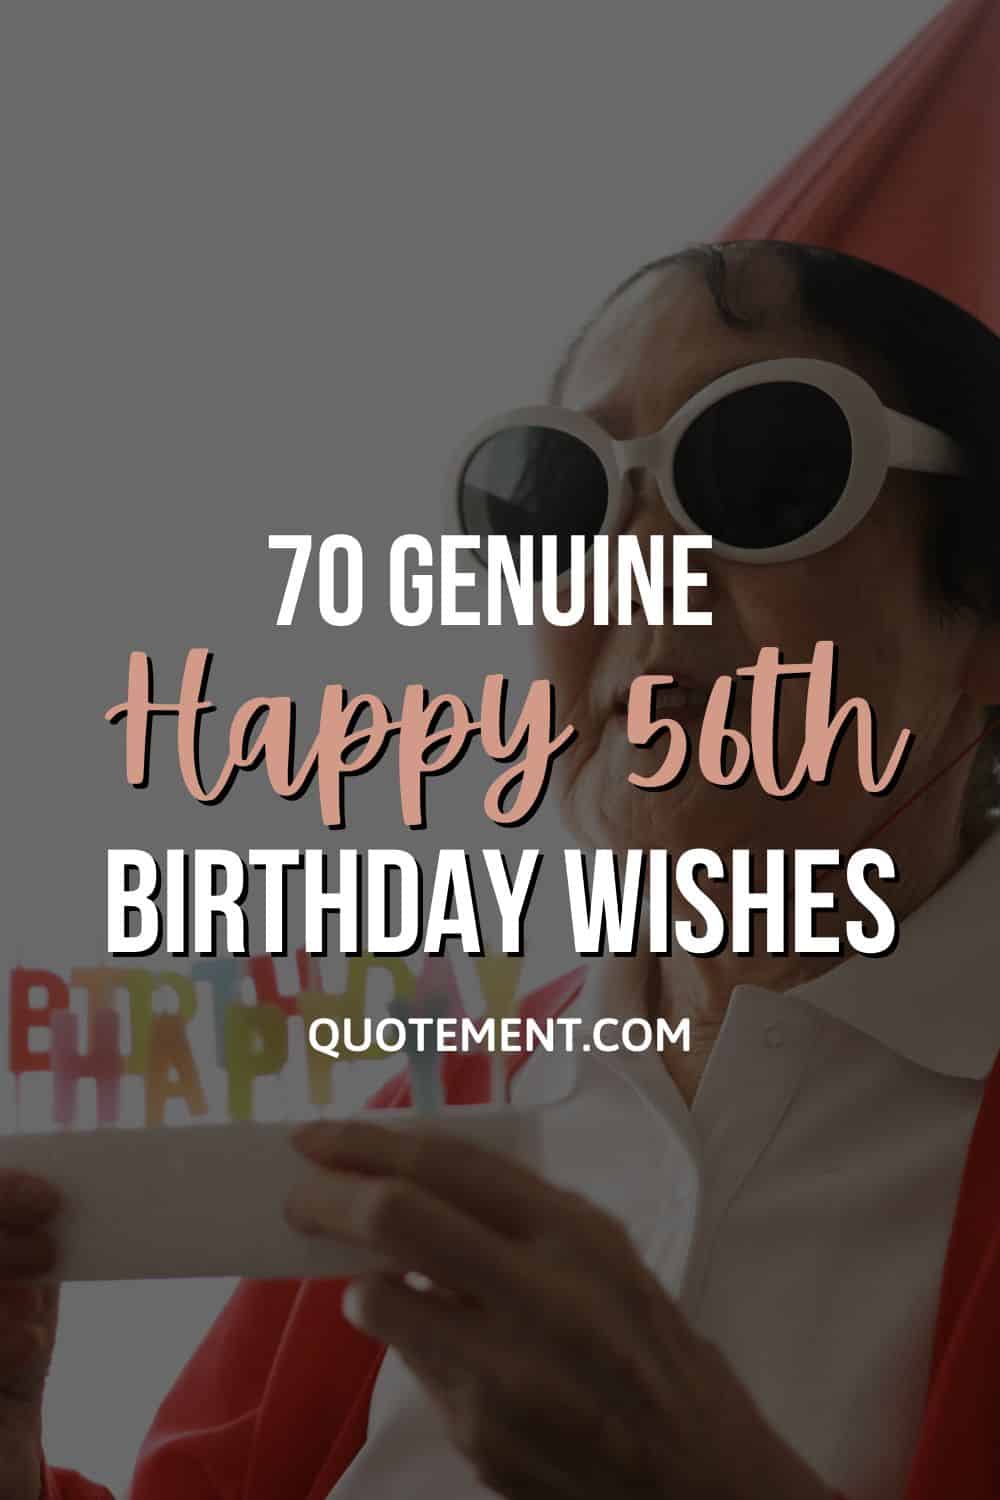 Collection Of 90 Happy 56th Birthday Wishes From The Heart
